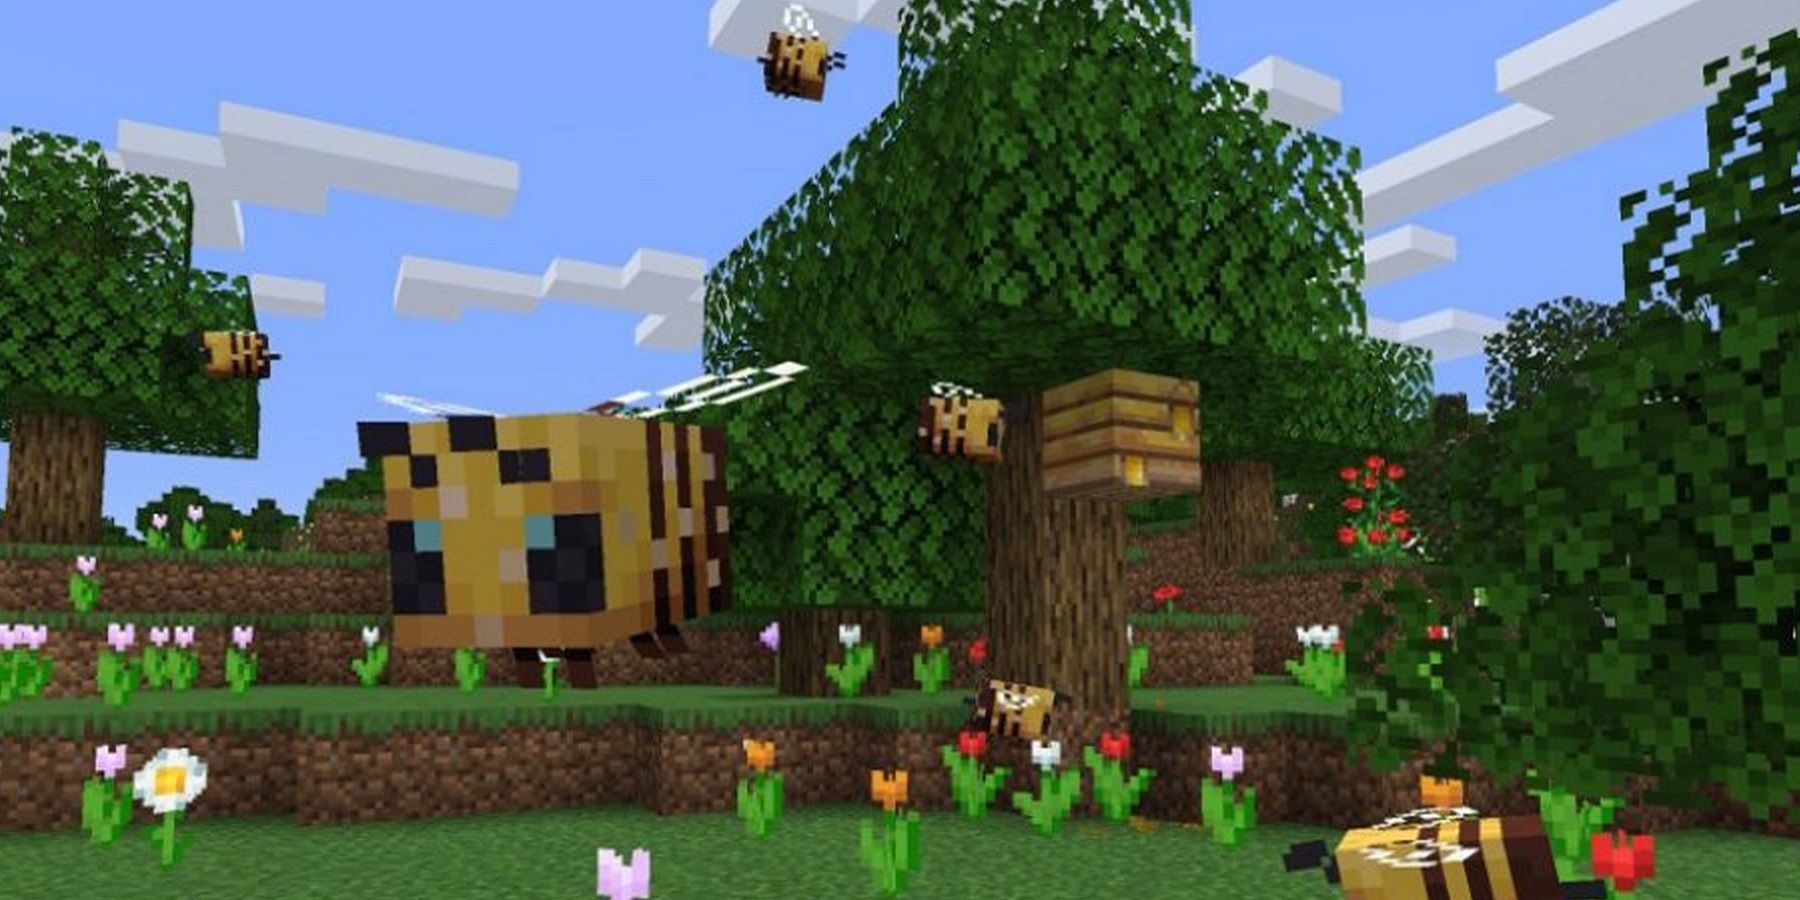 A screenshot from Minecraft showing some bees flying about outside.